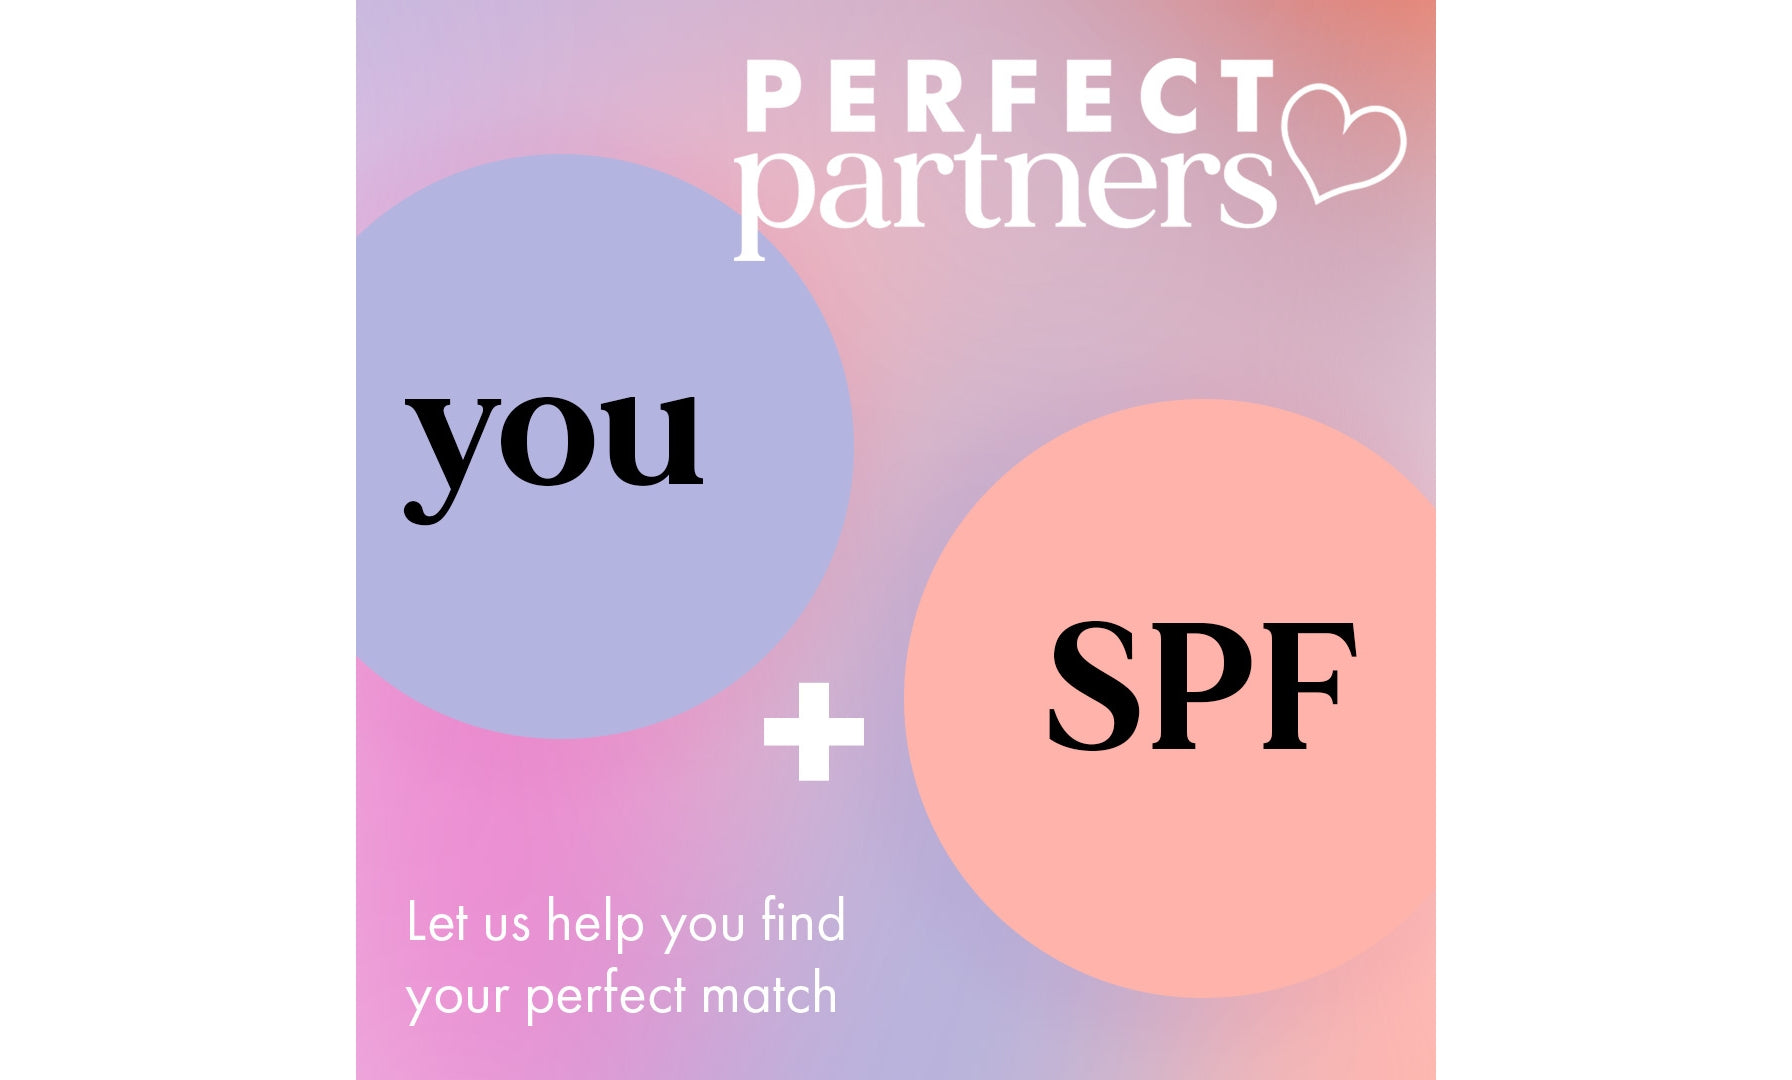 SPF - The Ultimate Love Story